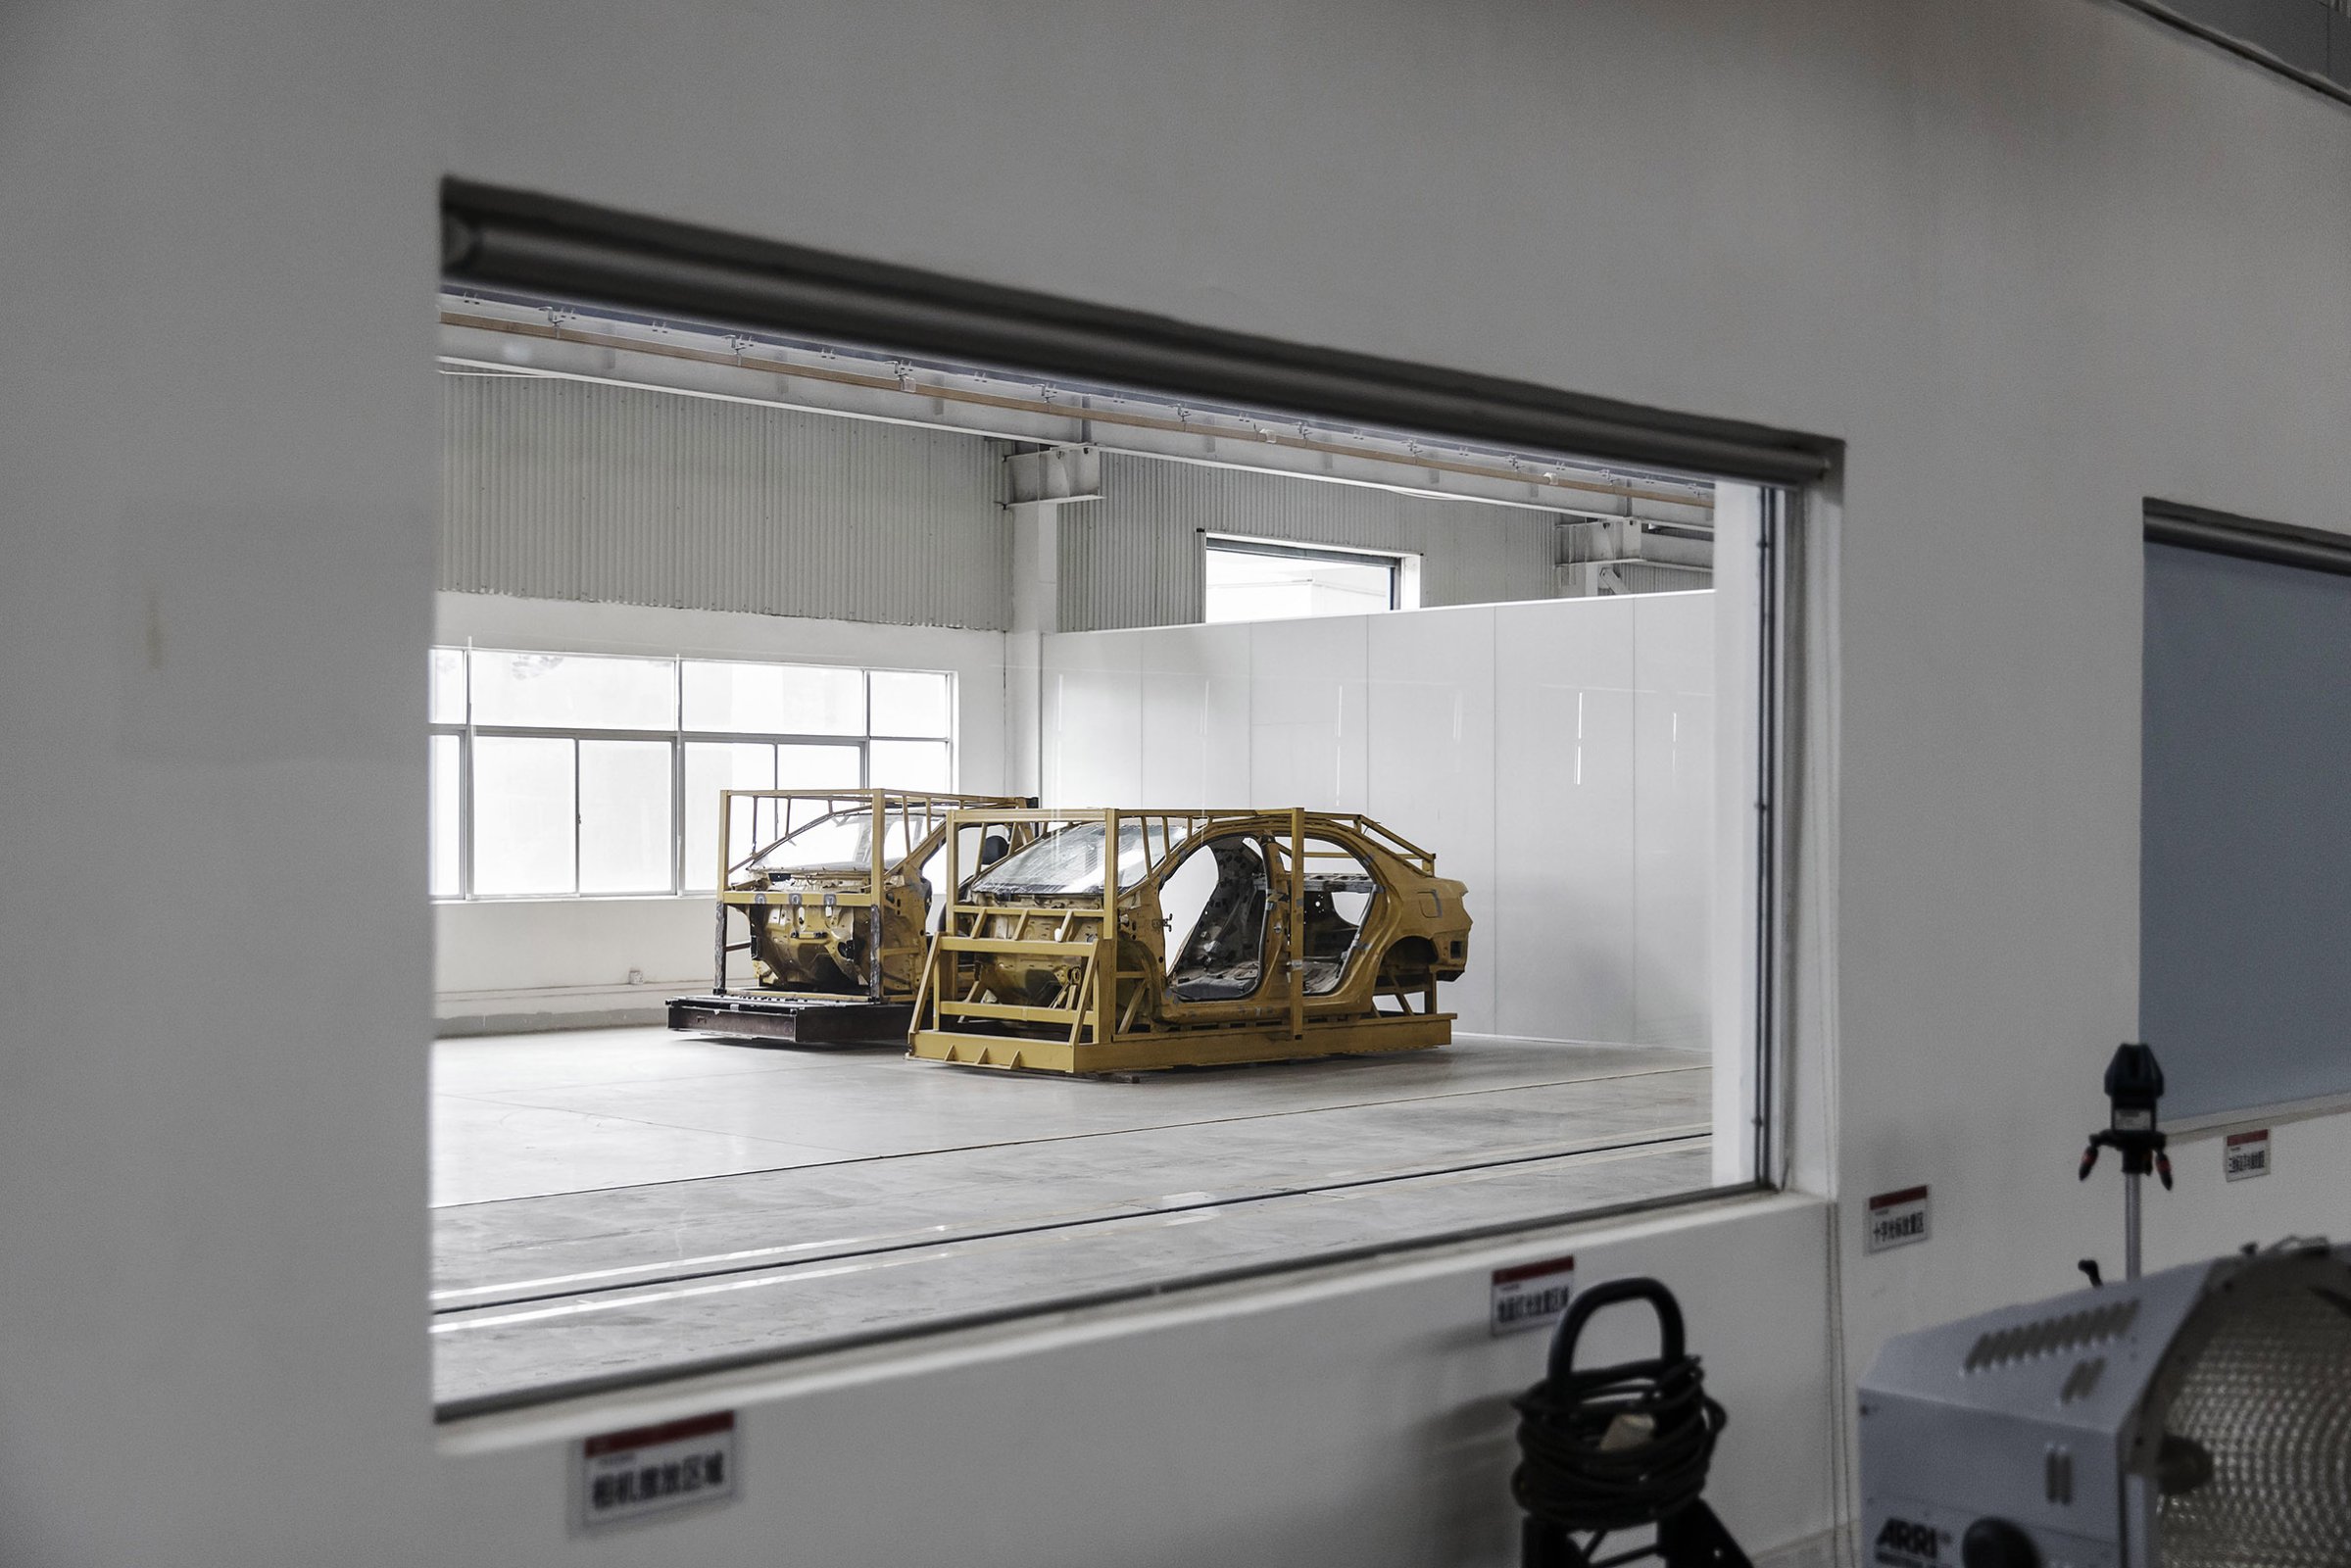 Vehicle frames await testing in leading car­maker BYD’s lab in Shenzhen, China